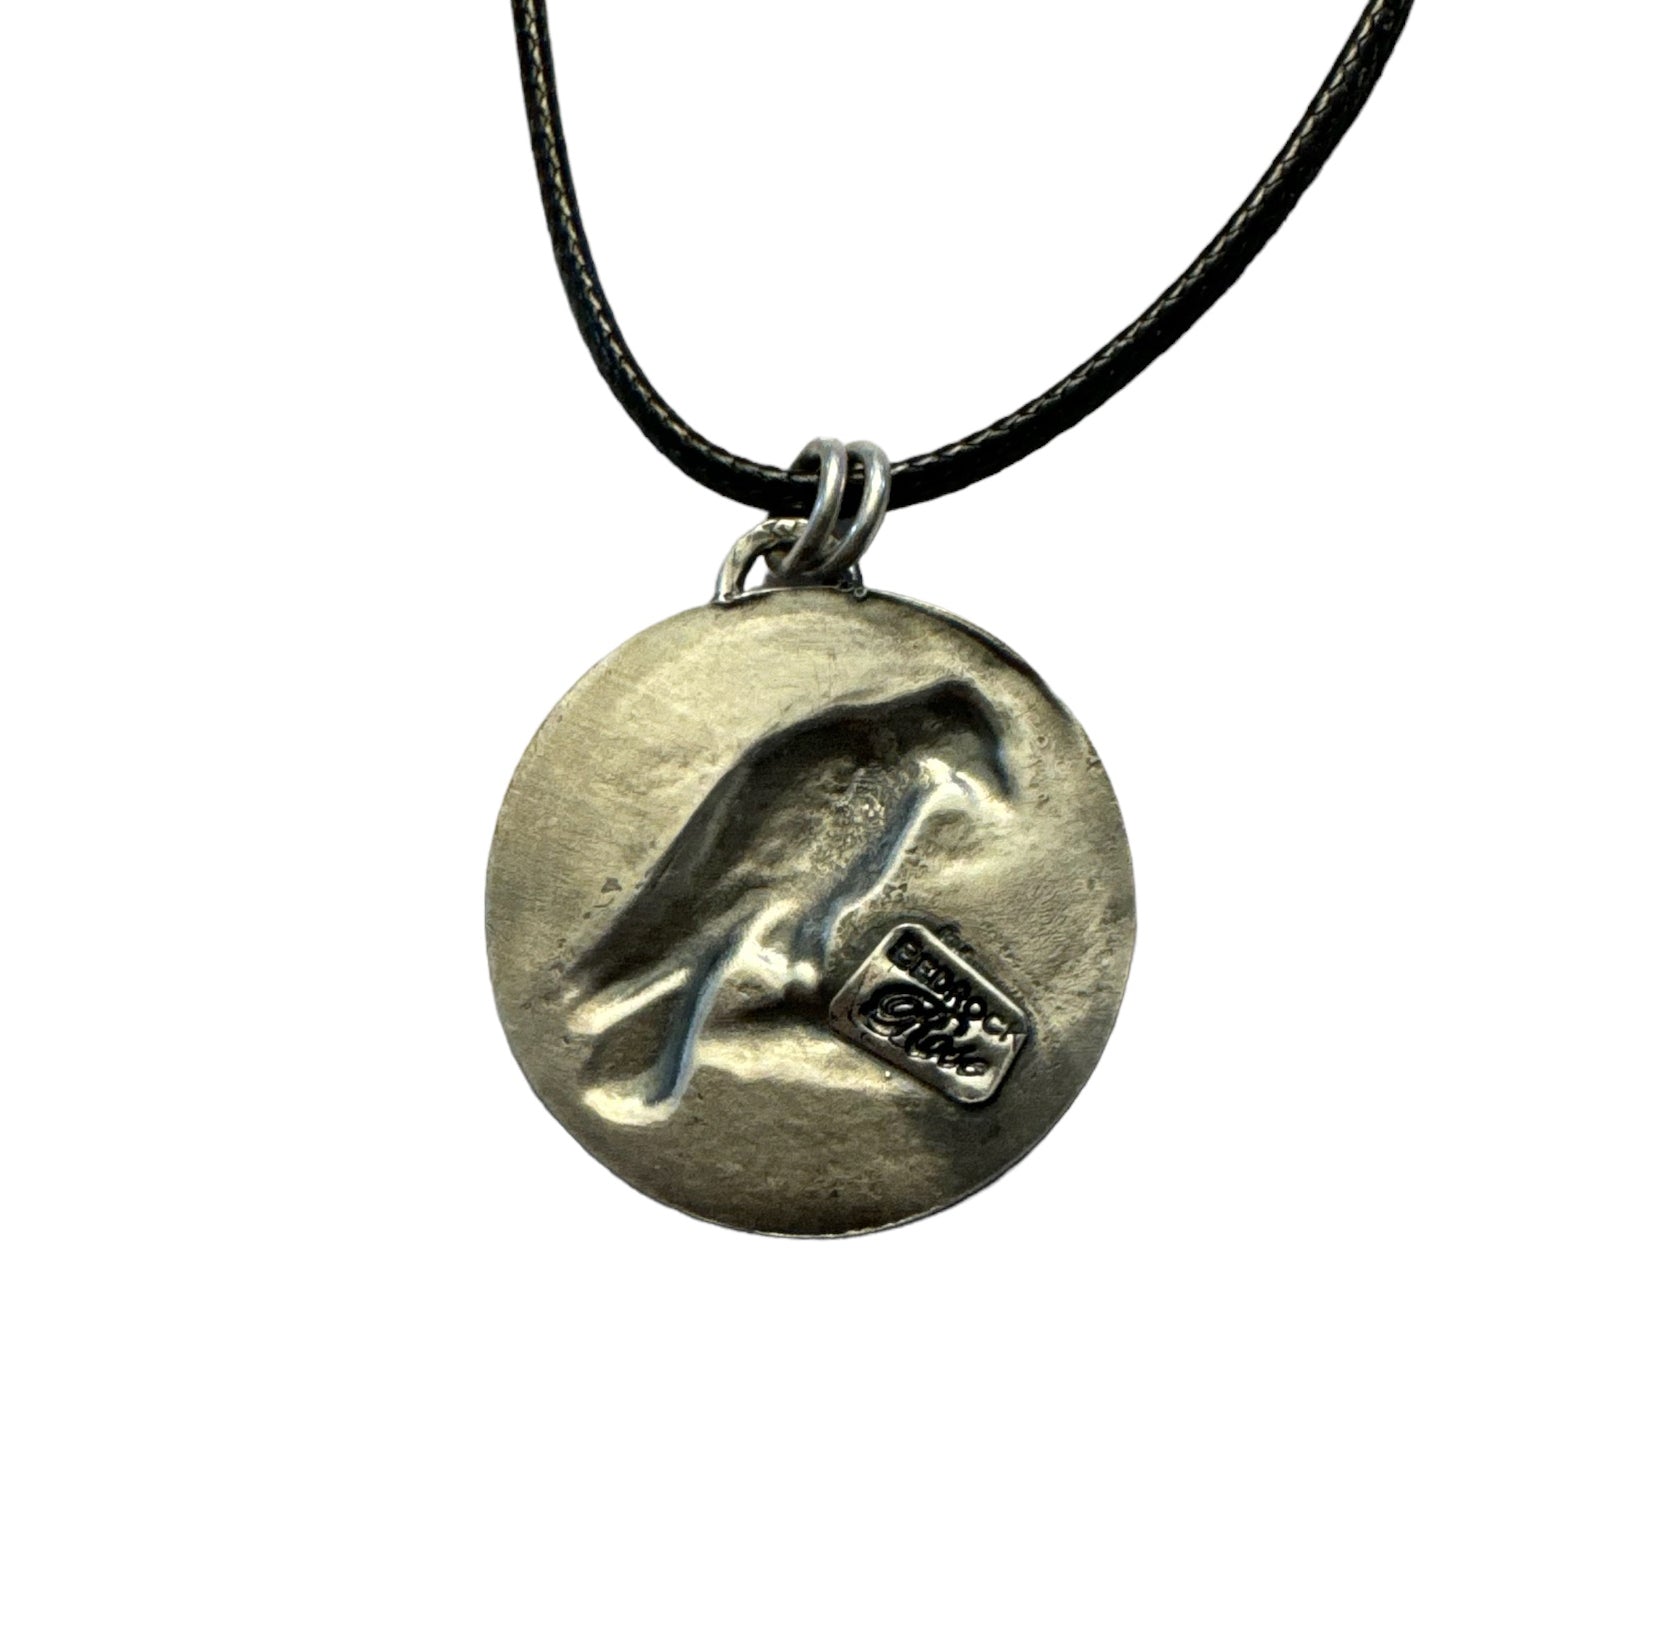 Back view of detailed crow design on the round silver pendant